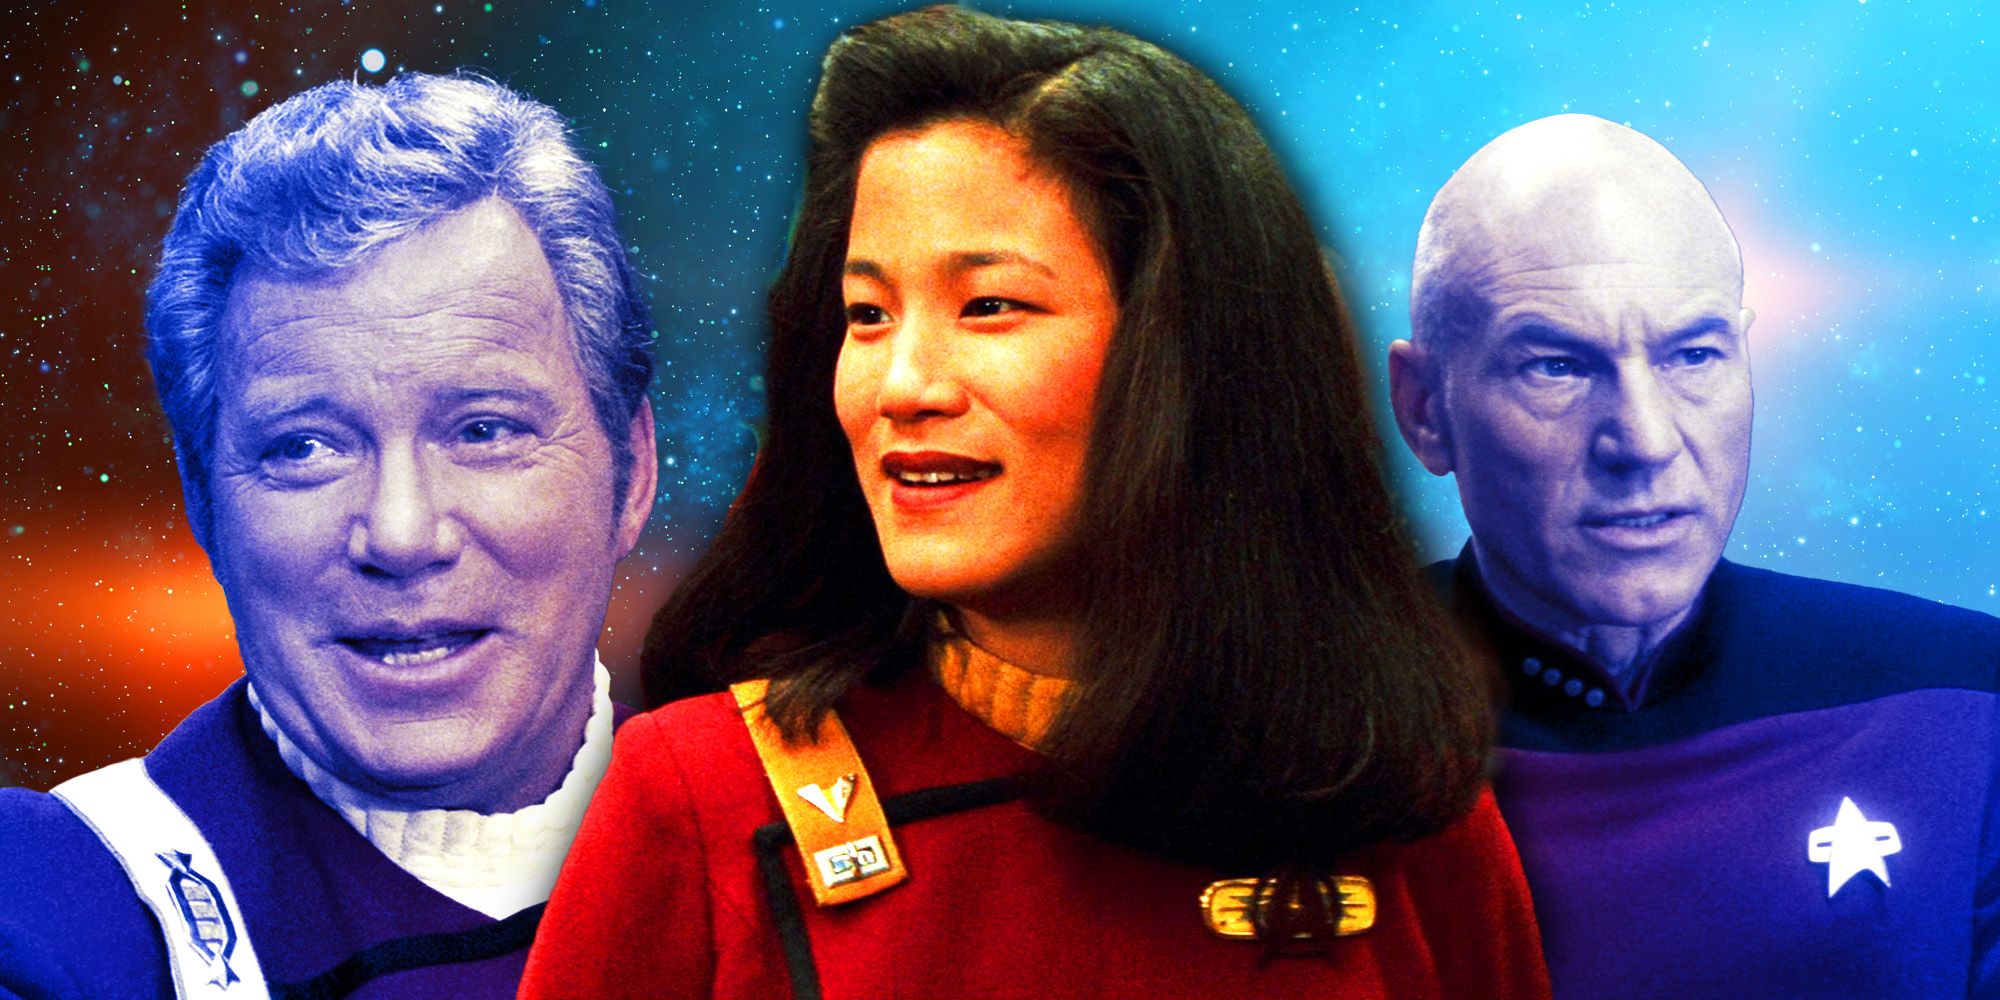 Demora Sulu, Kirk and Picard from Generations